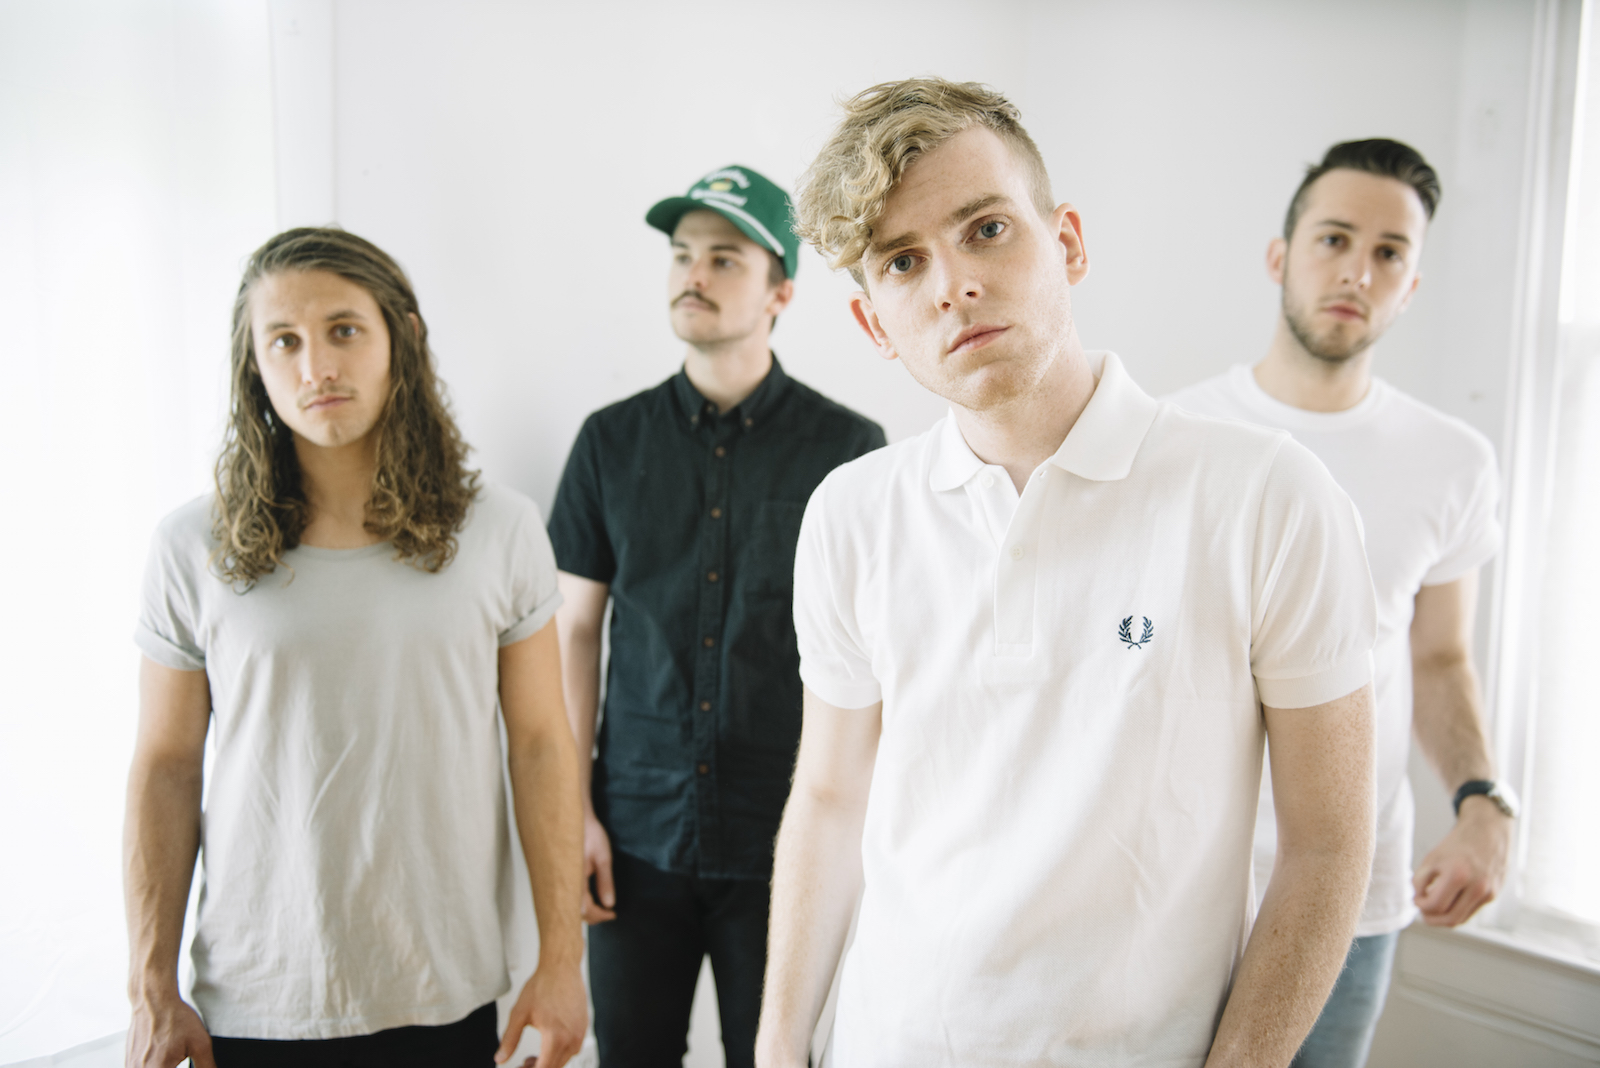 COIN Gives Your Favorite Band A Run For Their Money